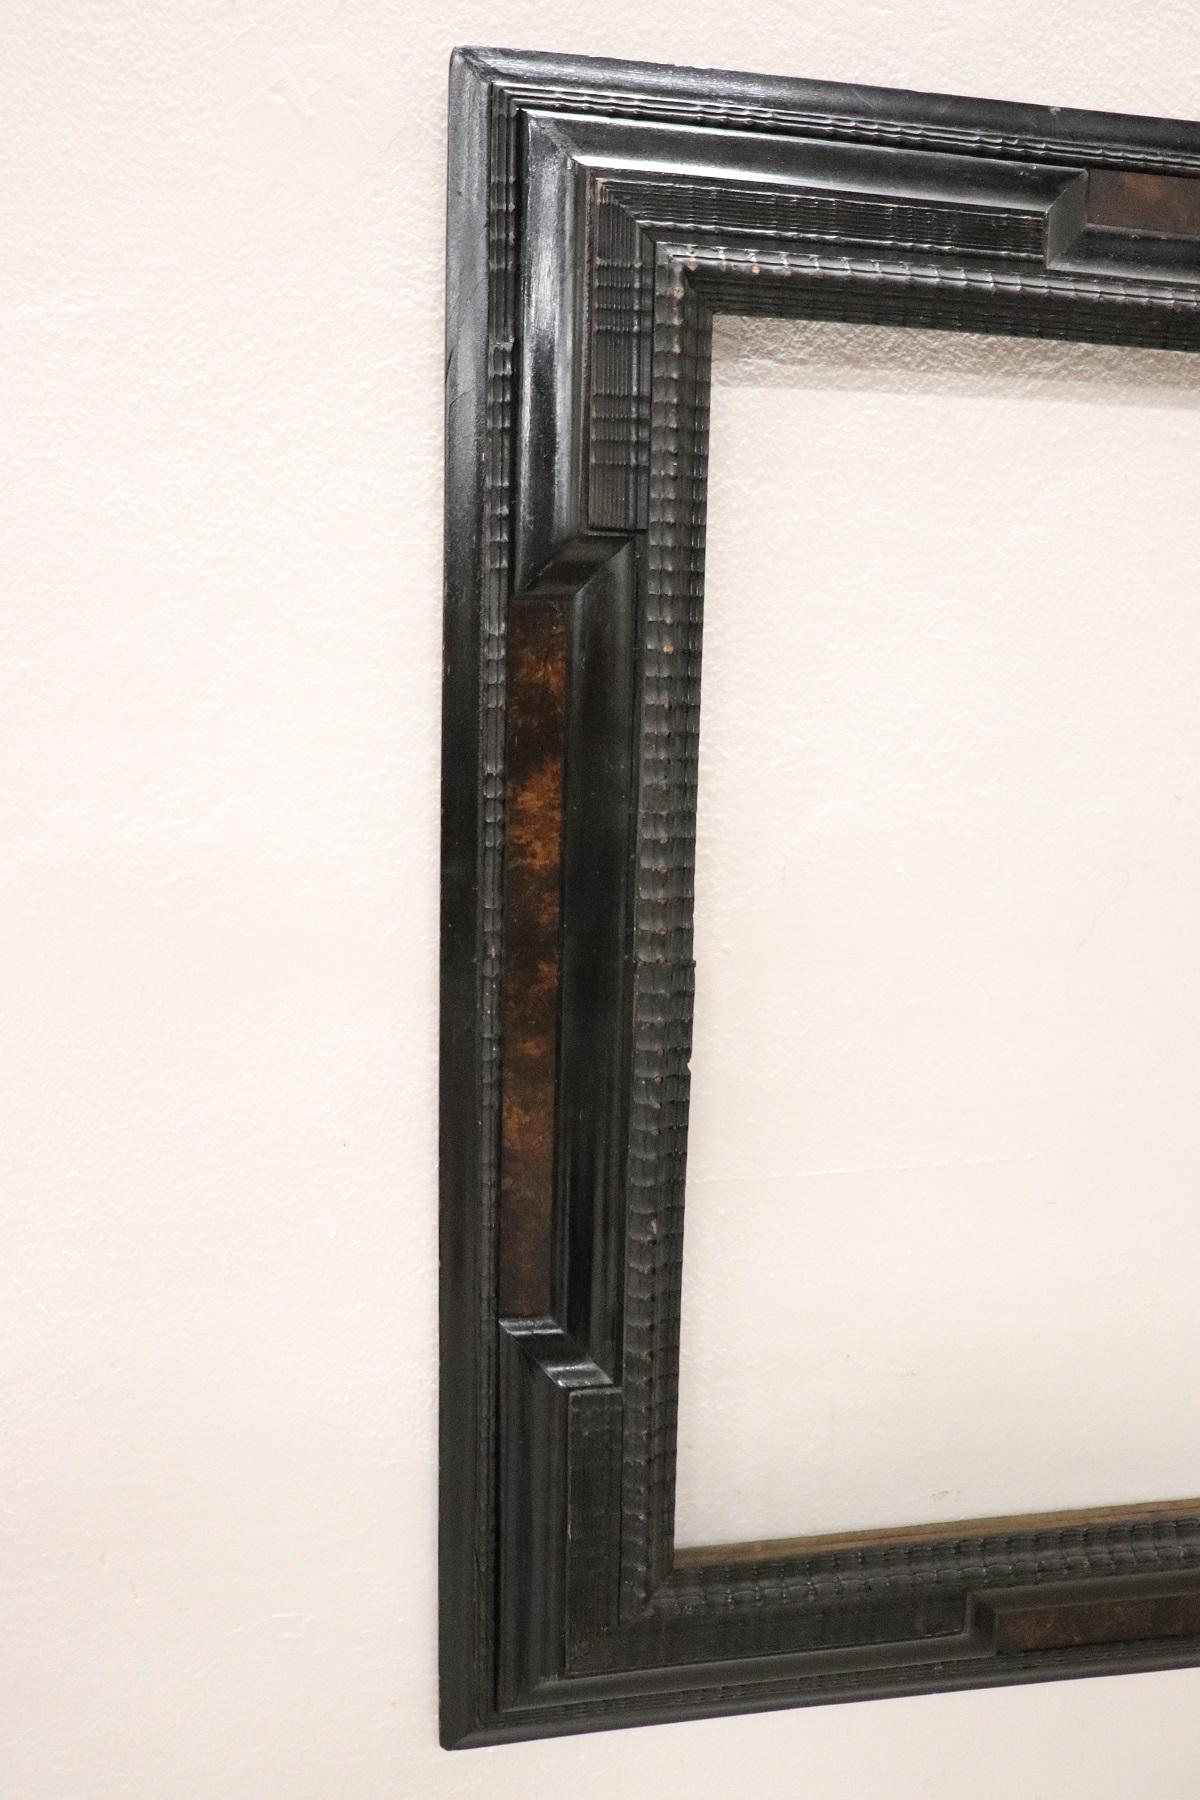 Refined frame from the end of the 19th century, a typical decoration called guilloché made of wood and ebonized in black tint as the taste of the period required.